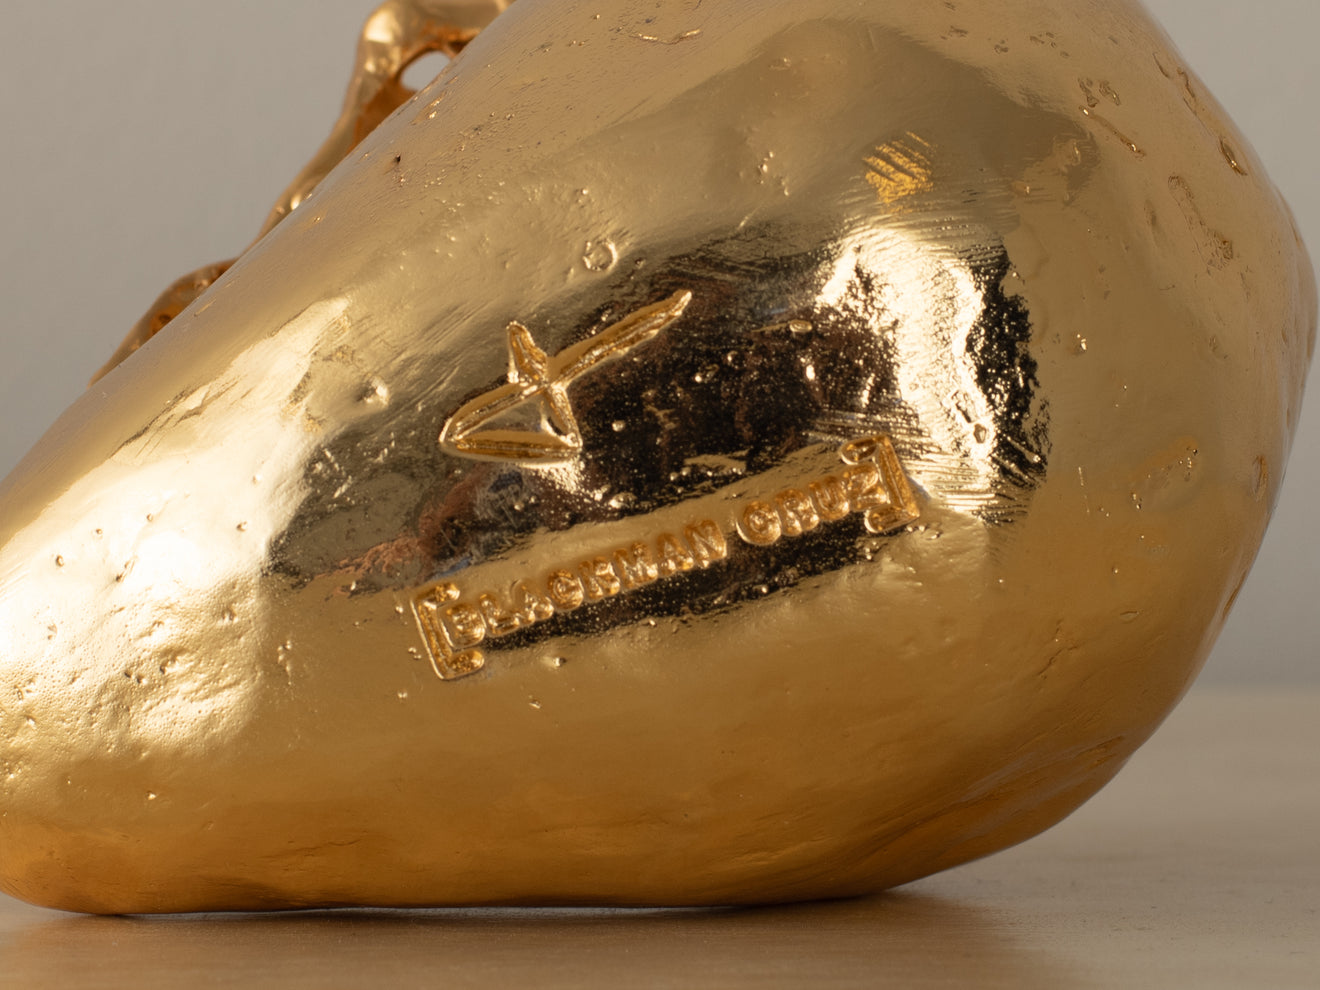 14K GOLD PLATED HEART SCULPTURE BY JEFF PRICE